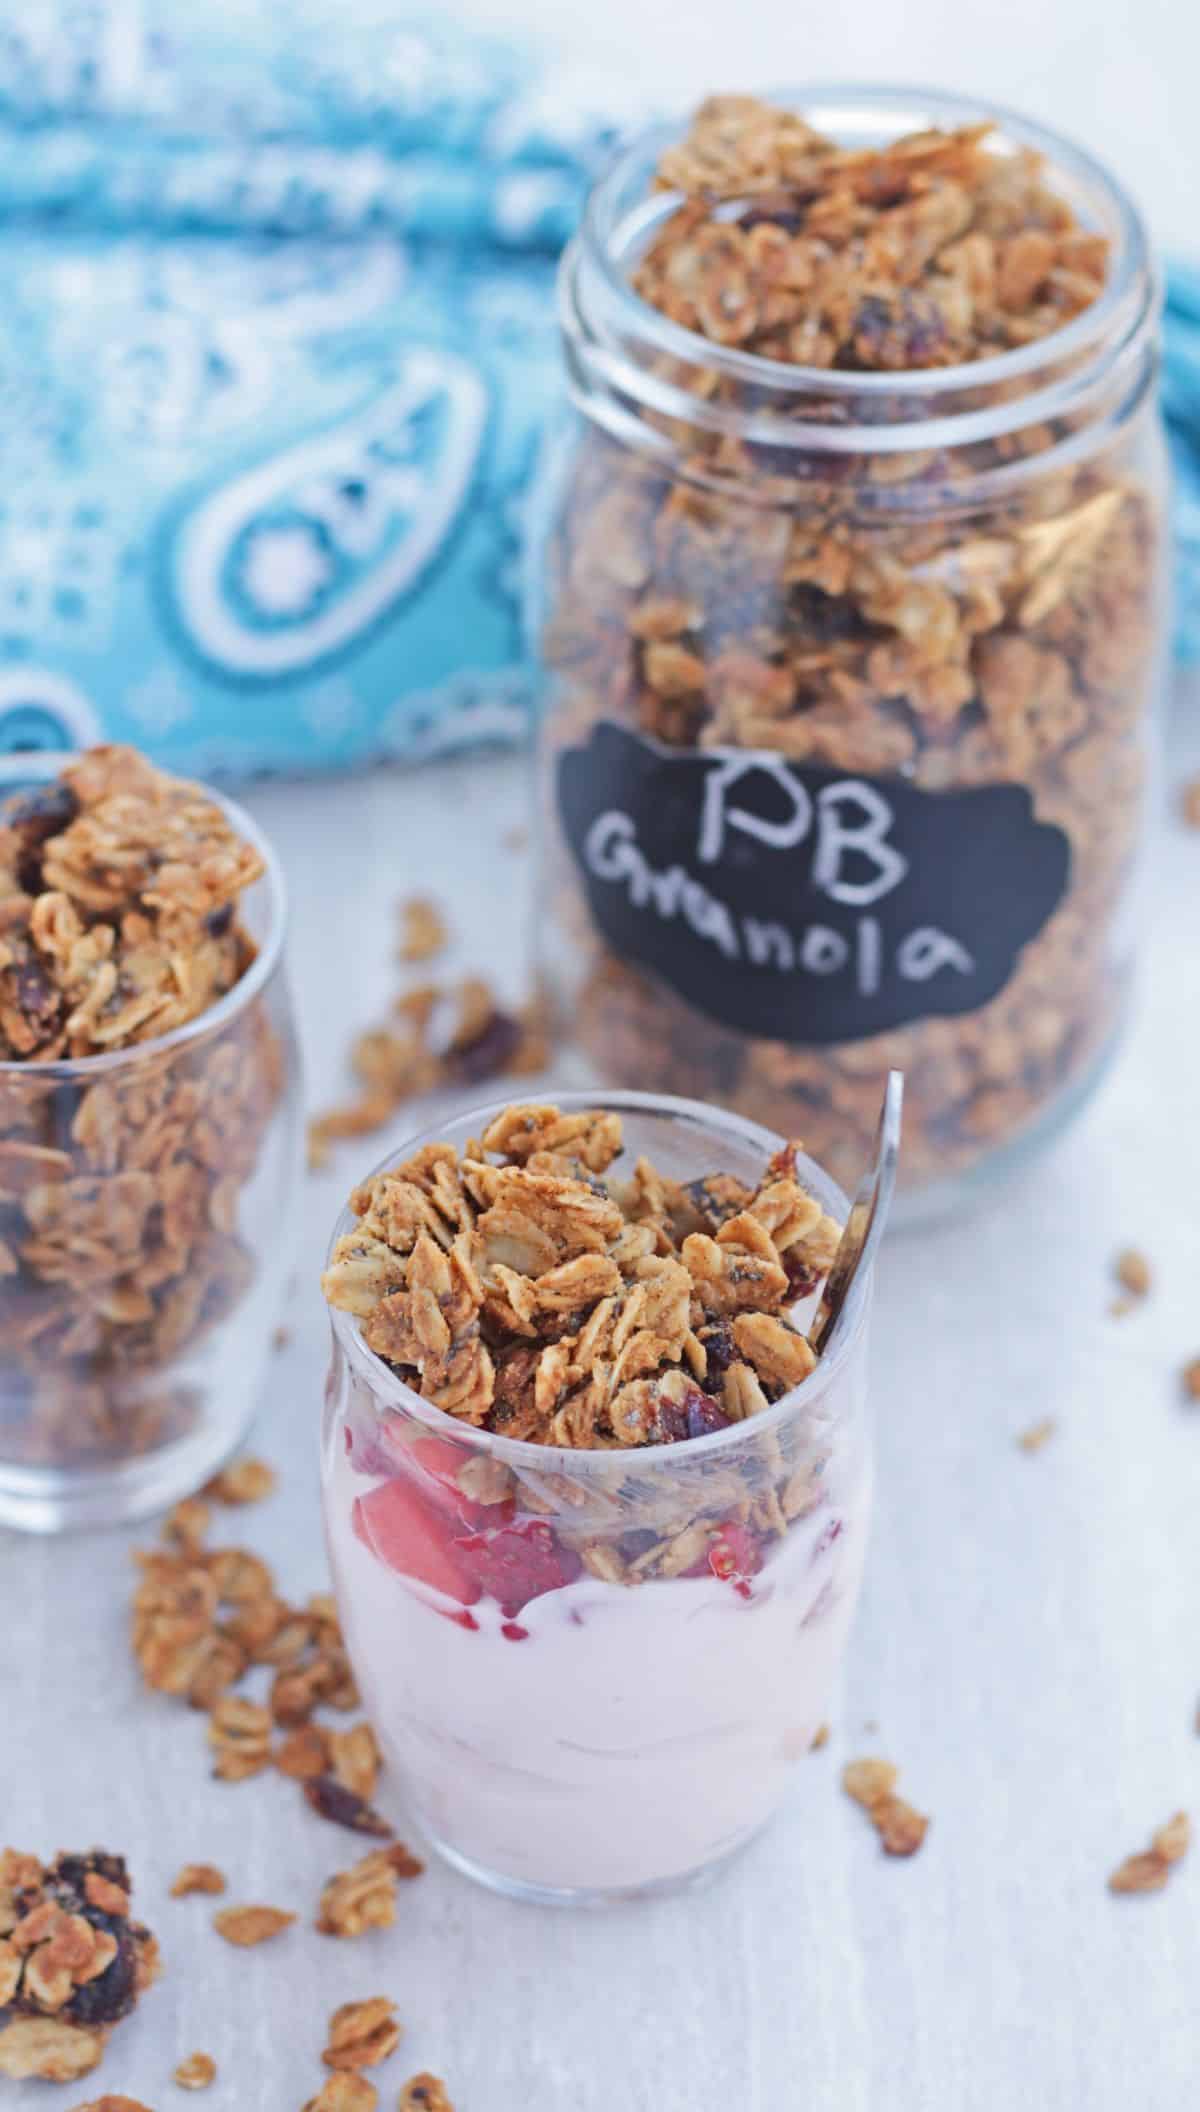 a bowl of yogurt topped with strawberry and granola and a jar of granola in the background